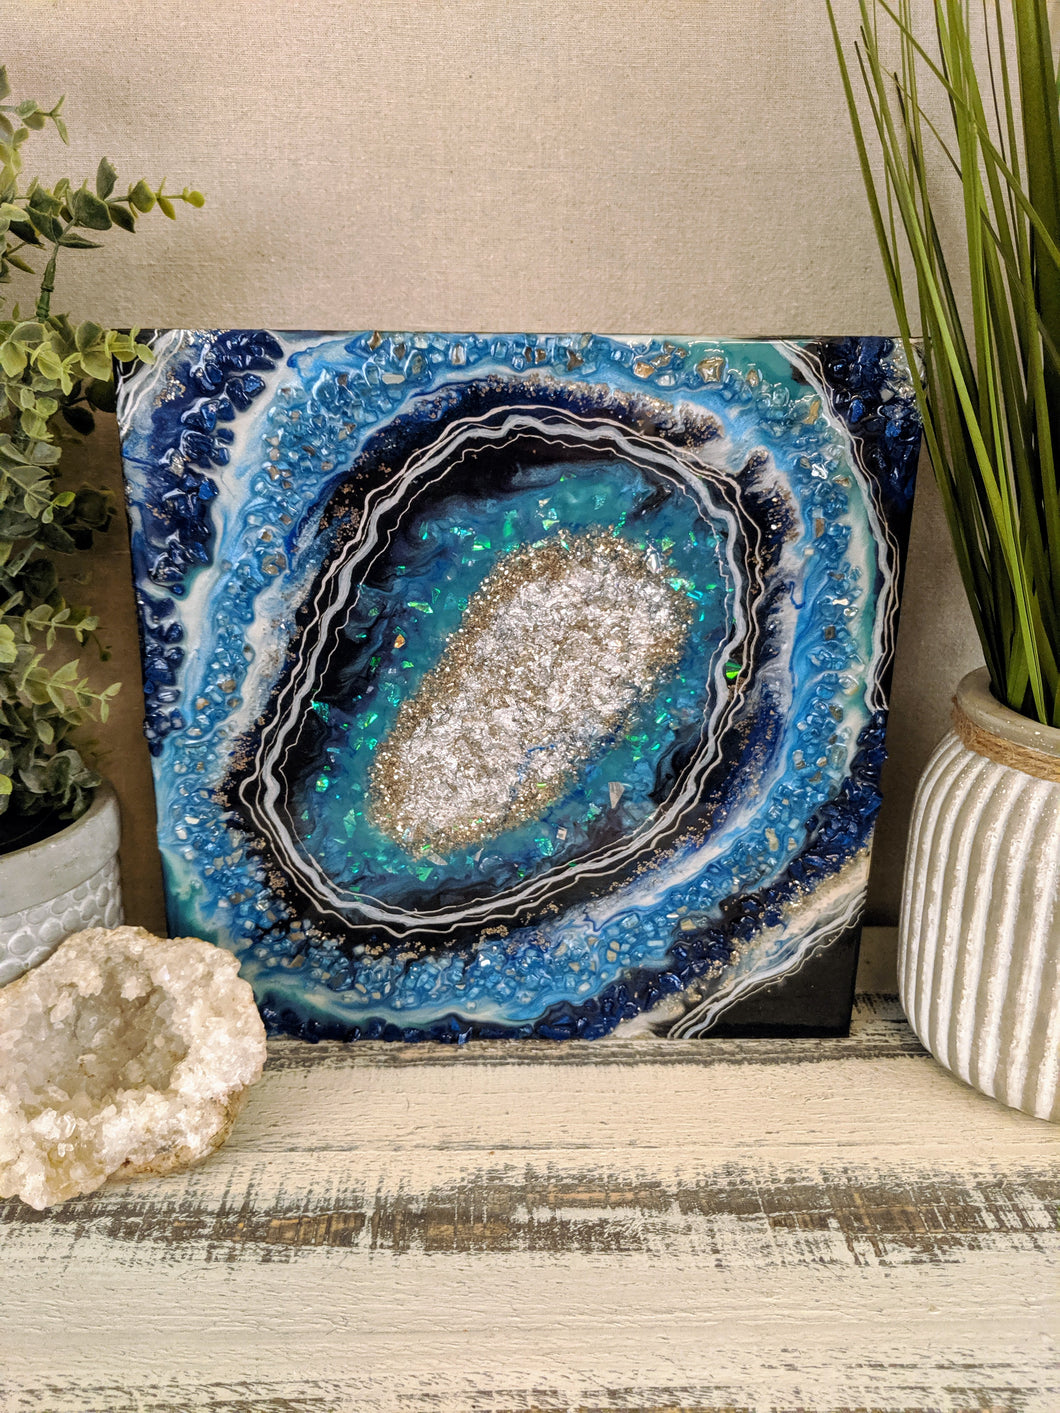 shades of blue geode with silver white glitter and fireglass